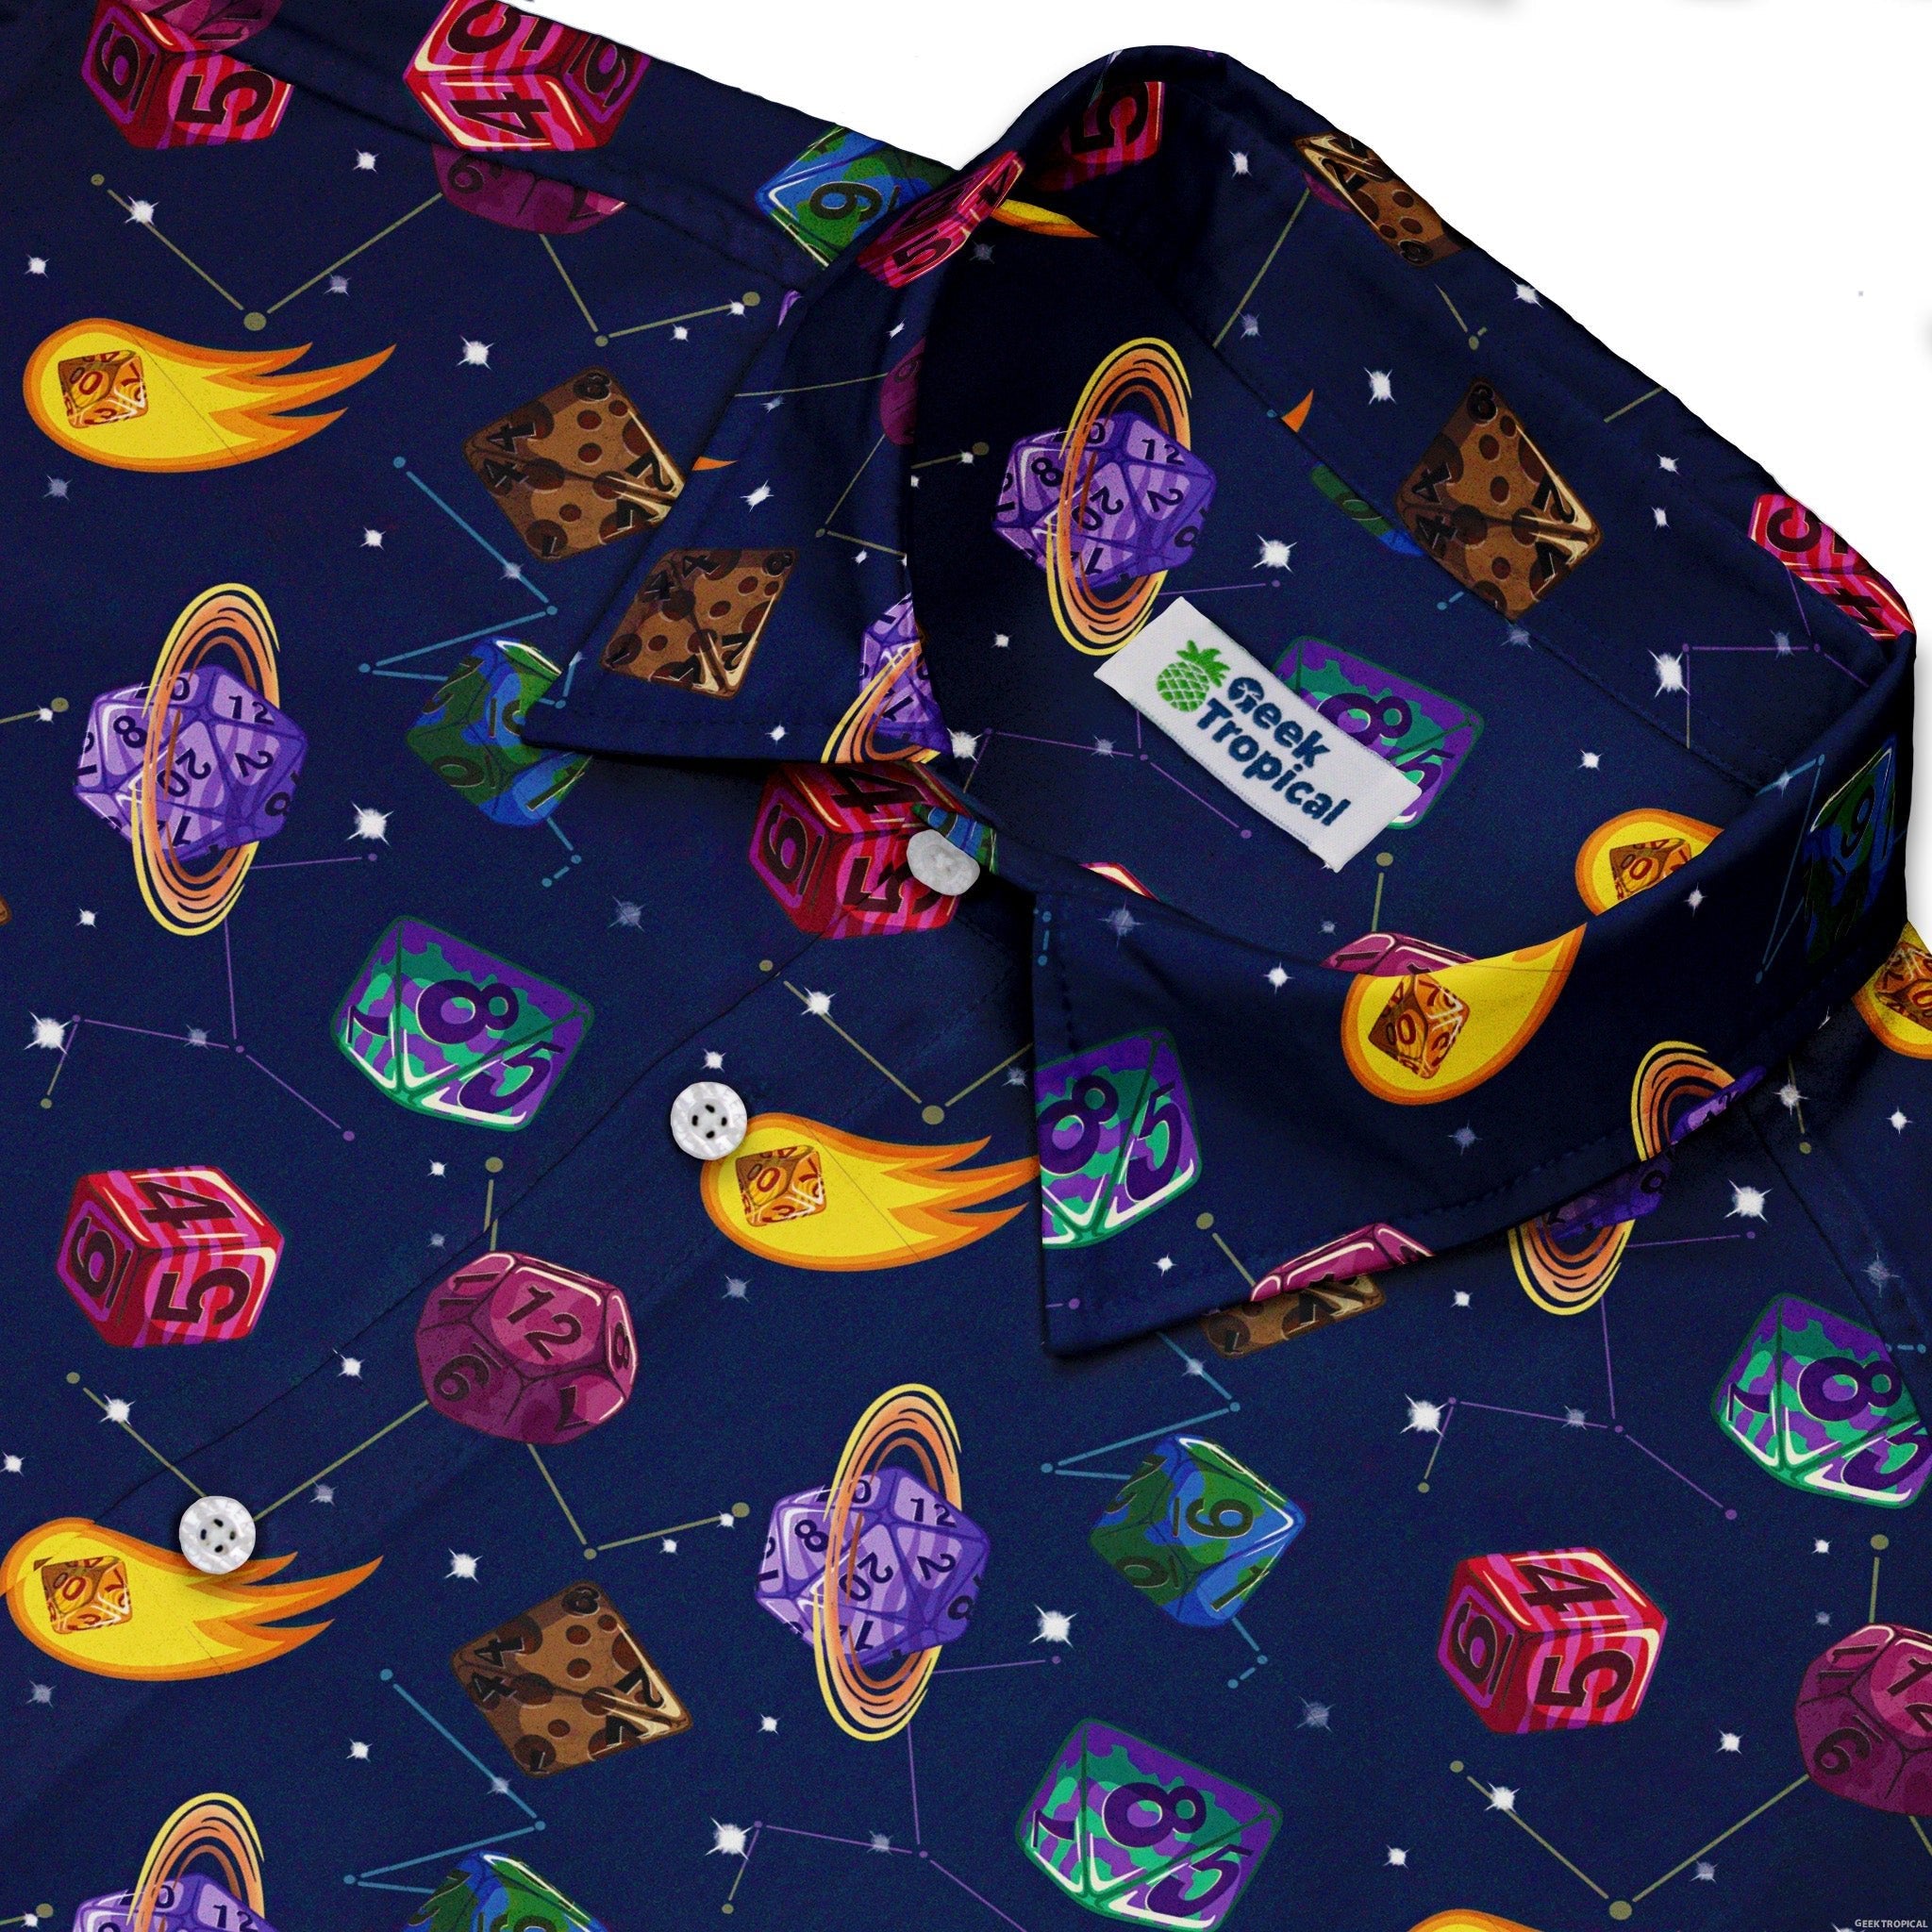 Space DND Dice Planets Button Up Shirt - adult sizing - Design by Carla Morrow - dnd & rpg print